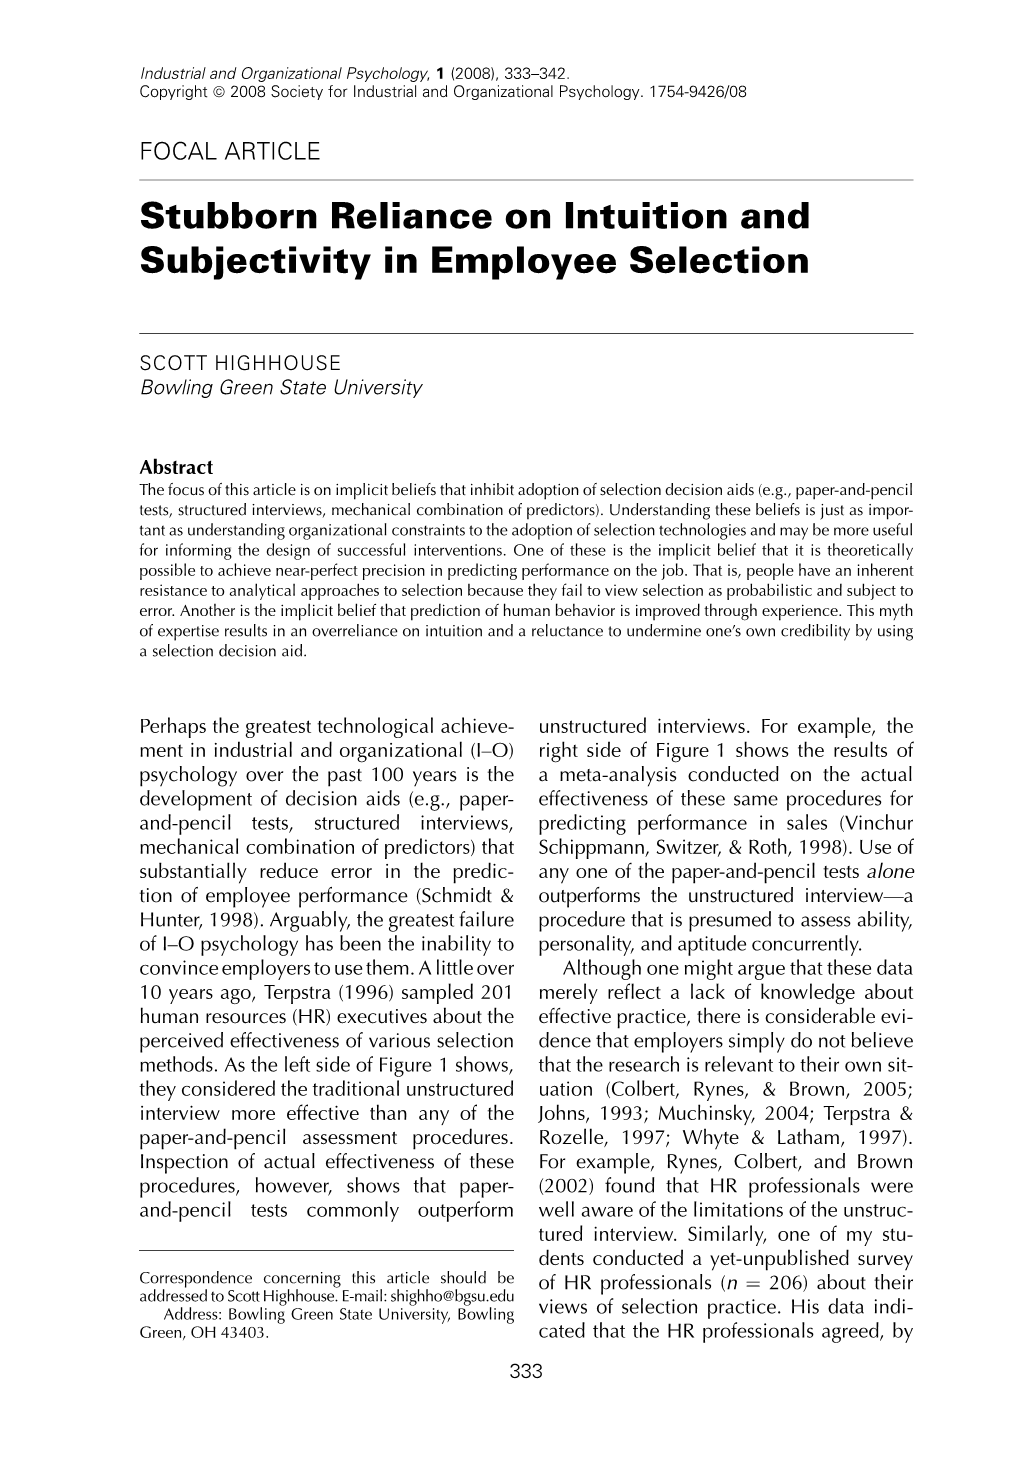 Stubborn Reliance on Intuition and Subjectivity in Employee Selection